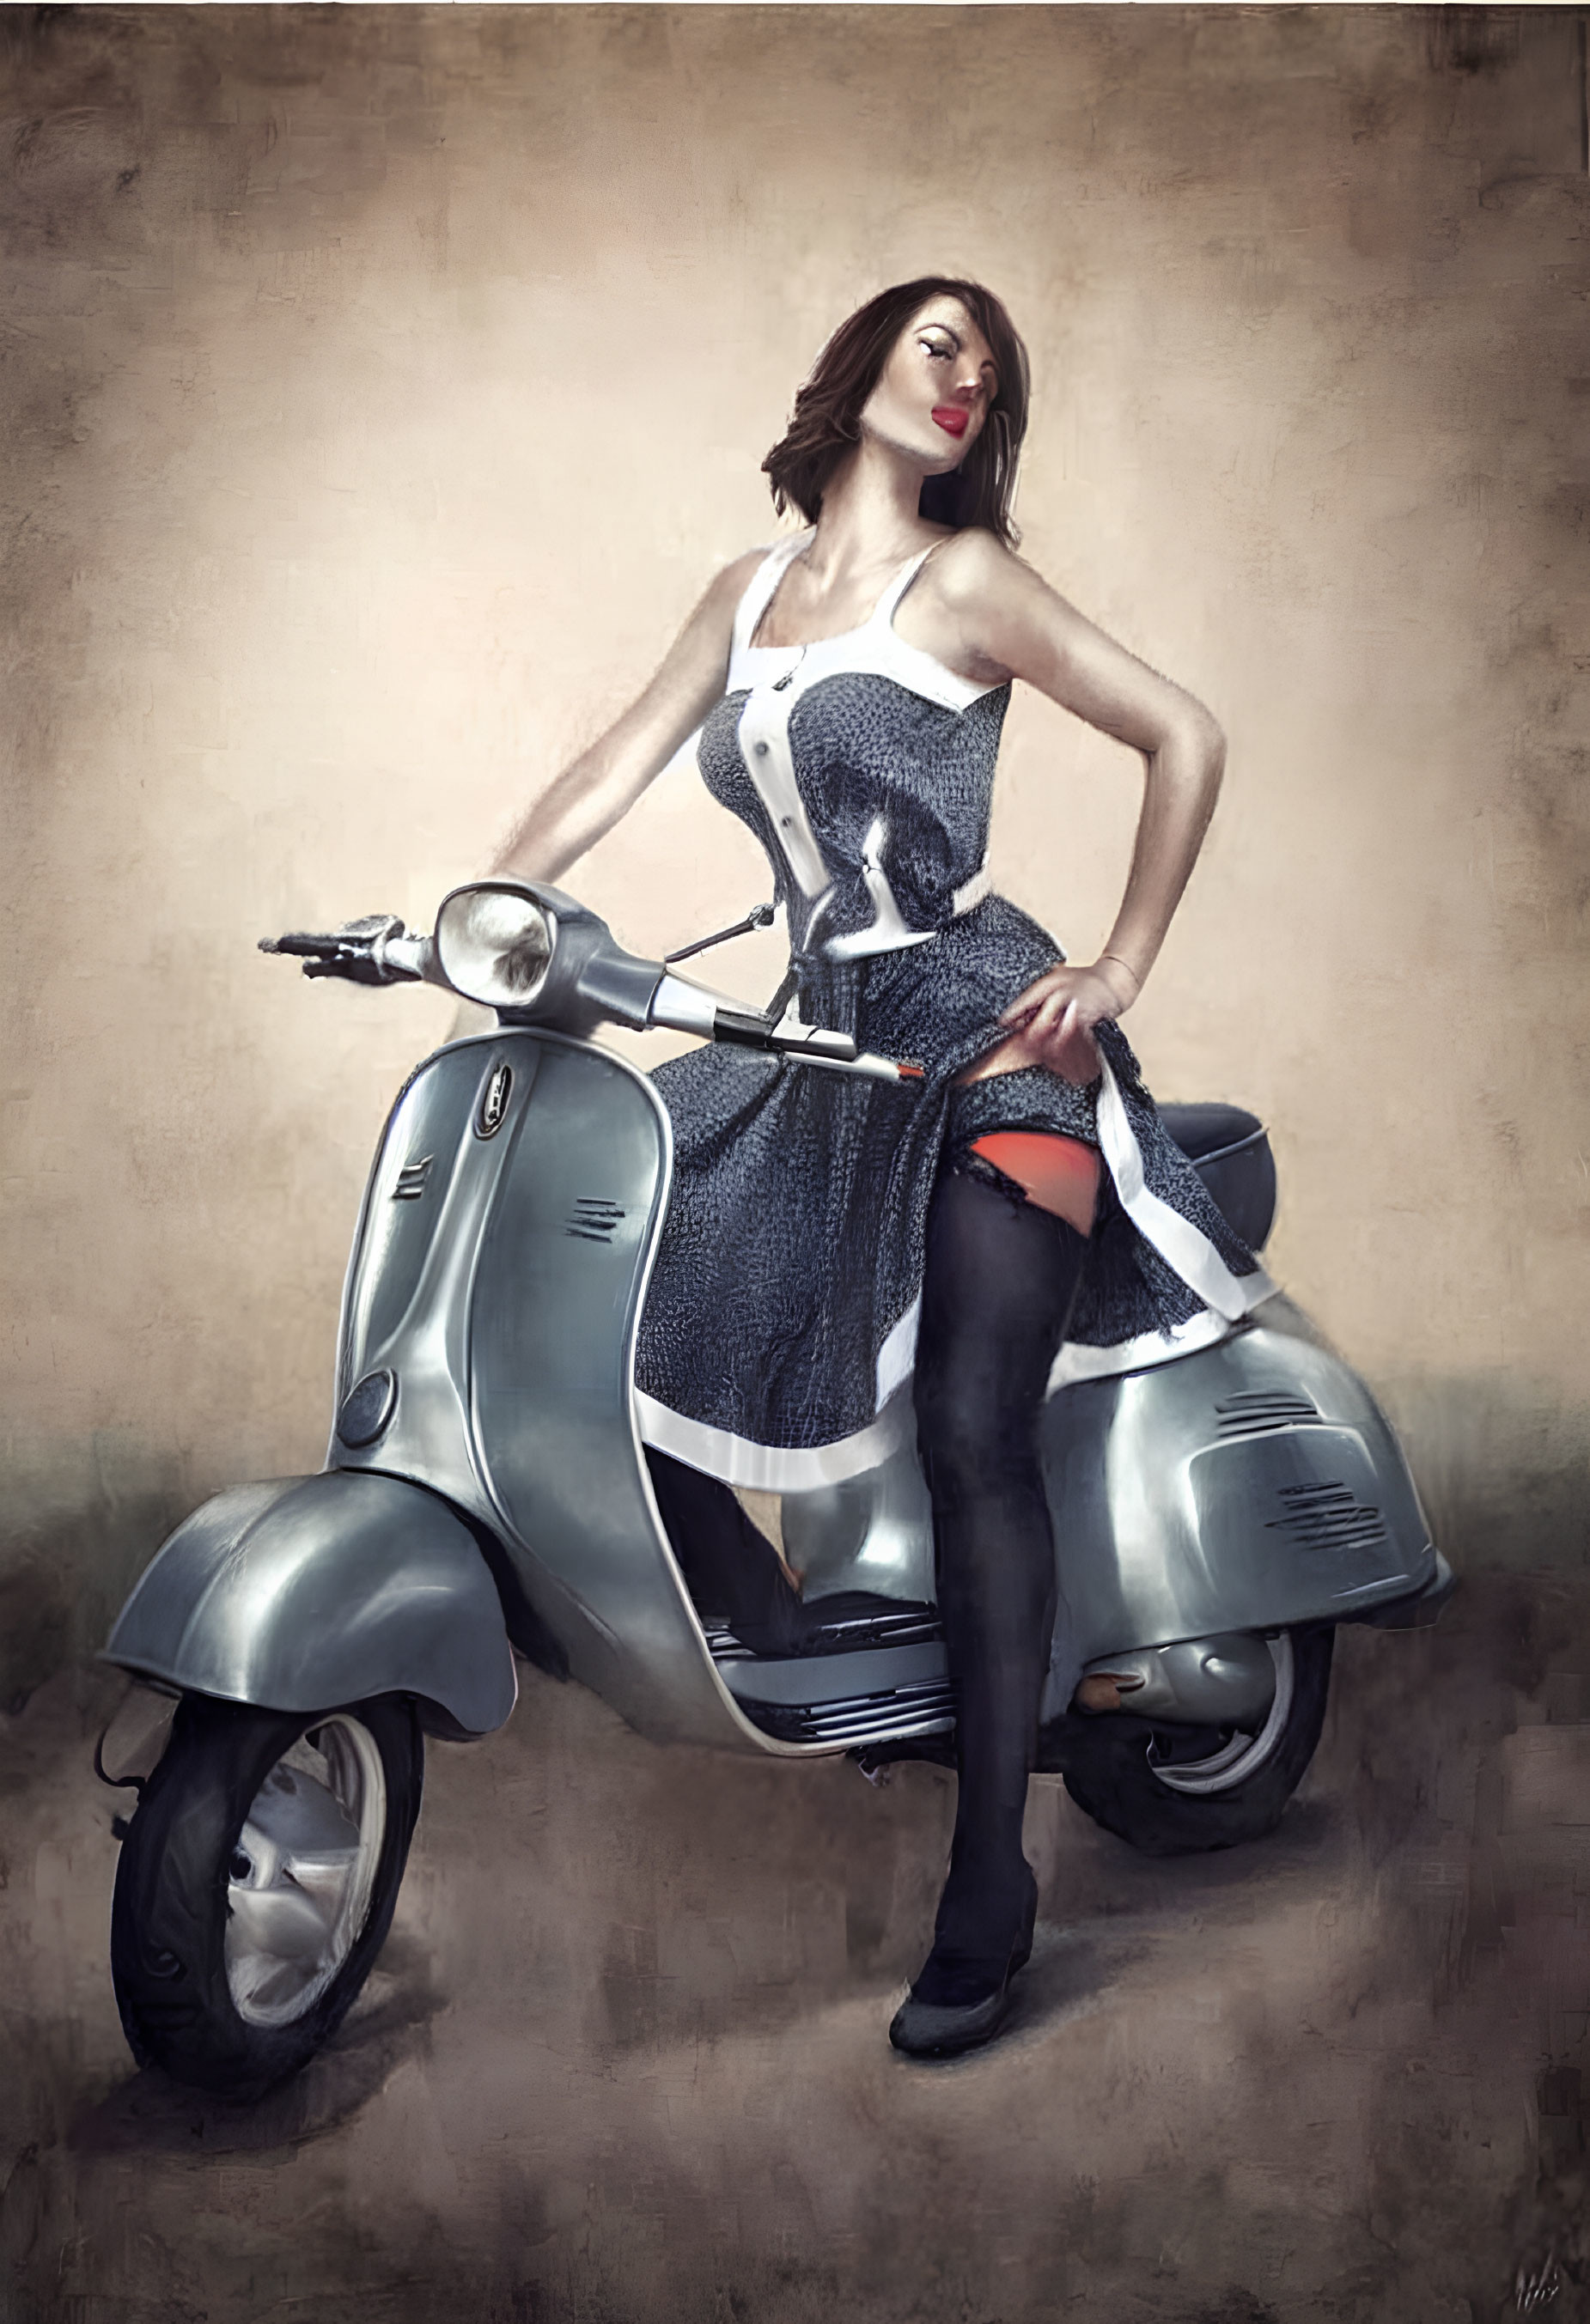 Vintage dress woman poses with lifted leg on classic scooter